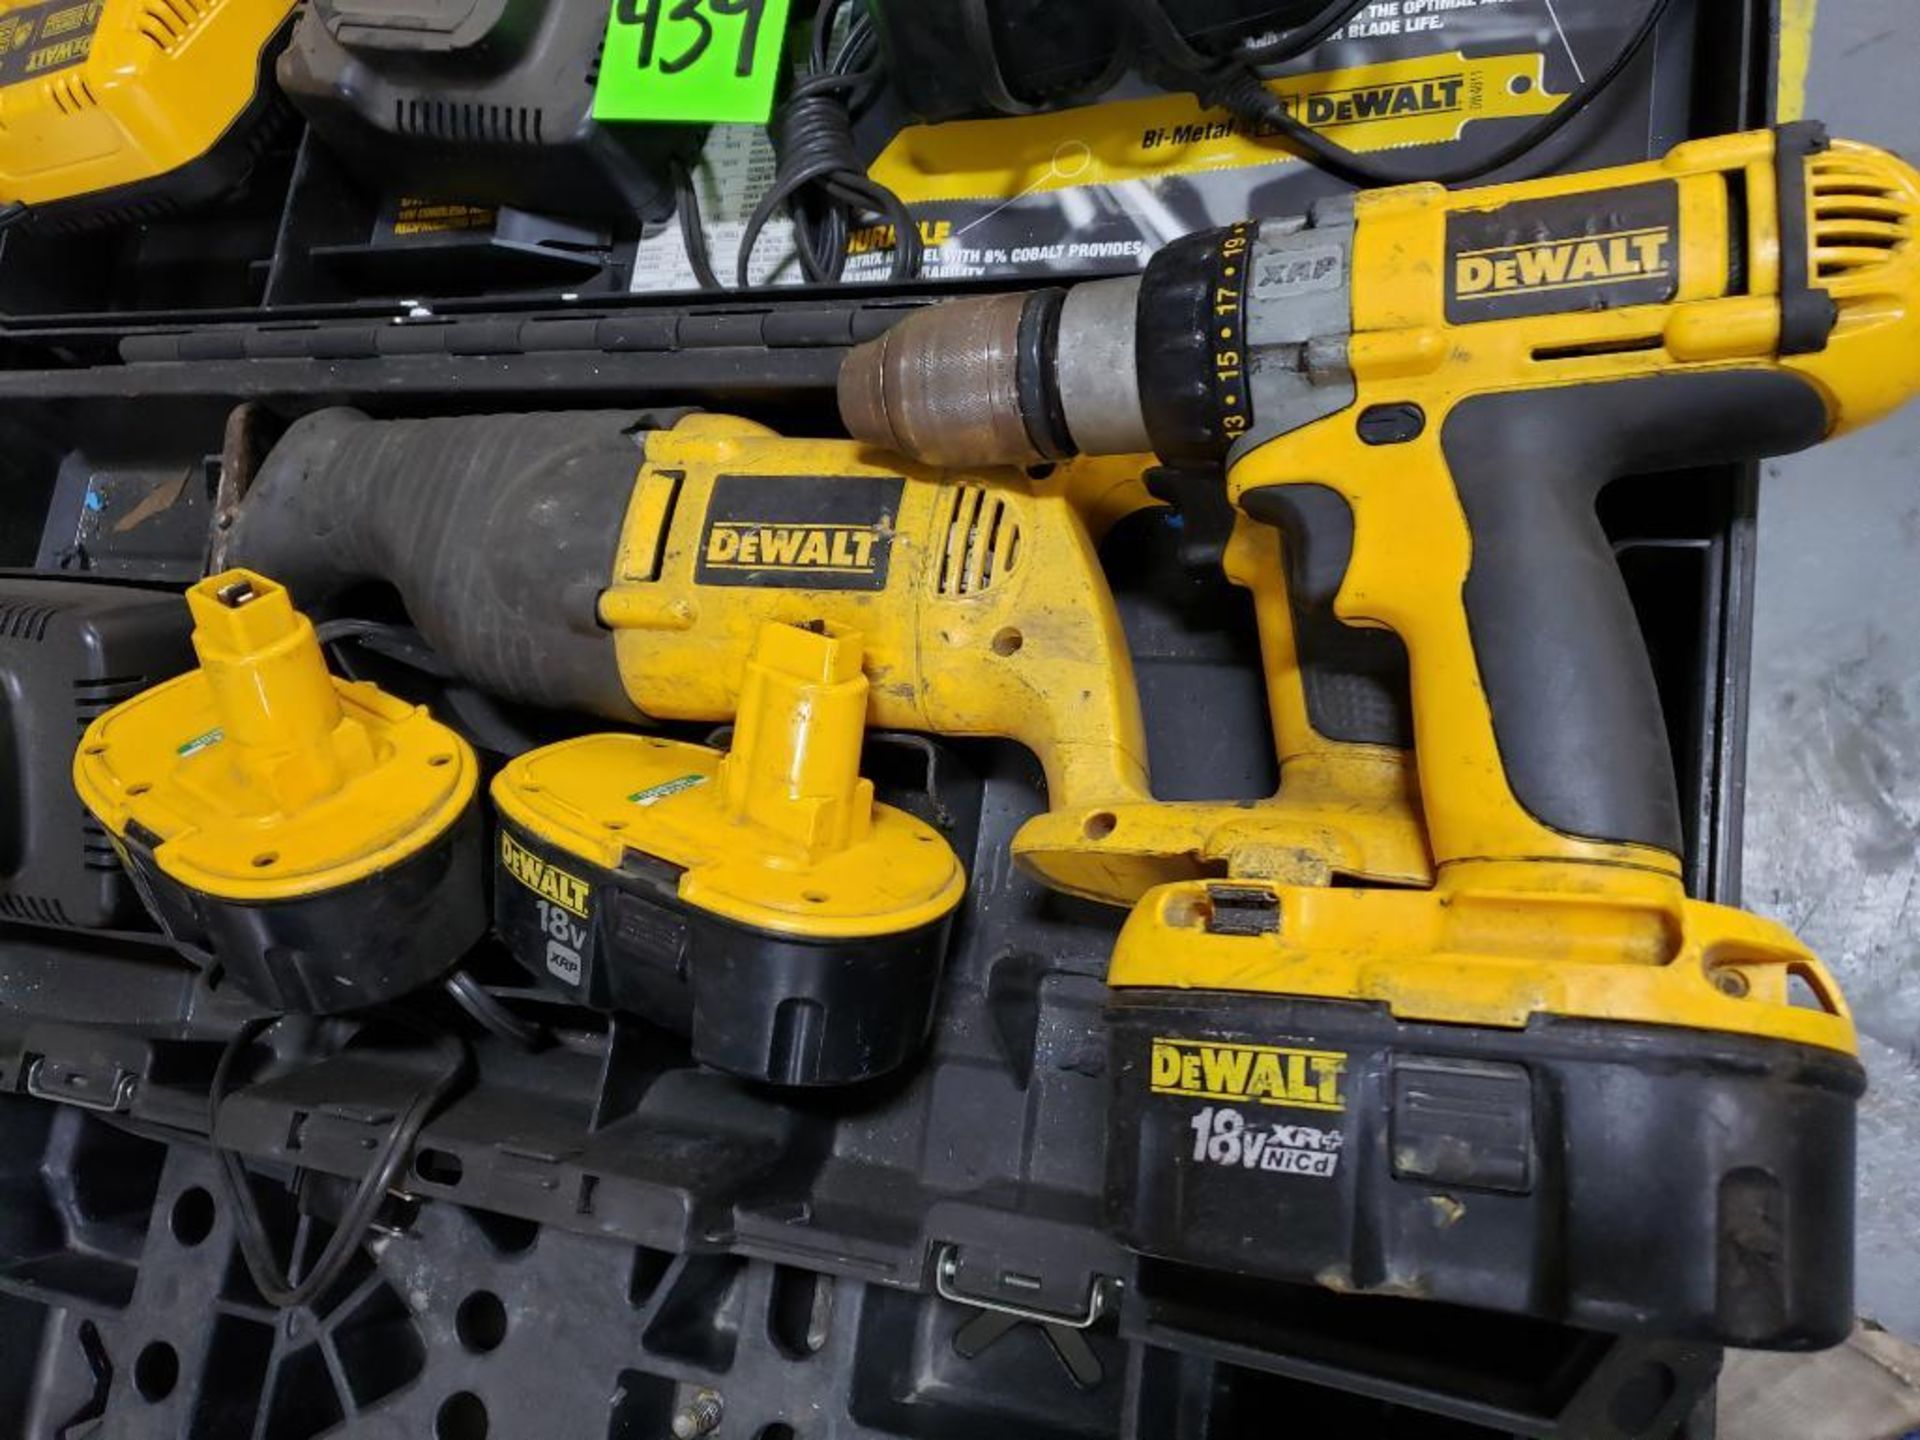 Dewalt 18v tool kit with drill and sawzall. Extra batteries and chargers - Image 5 of 5